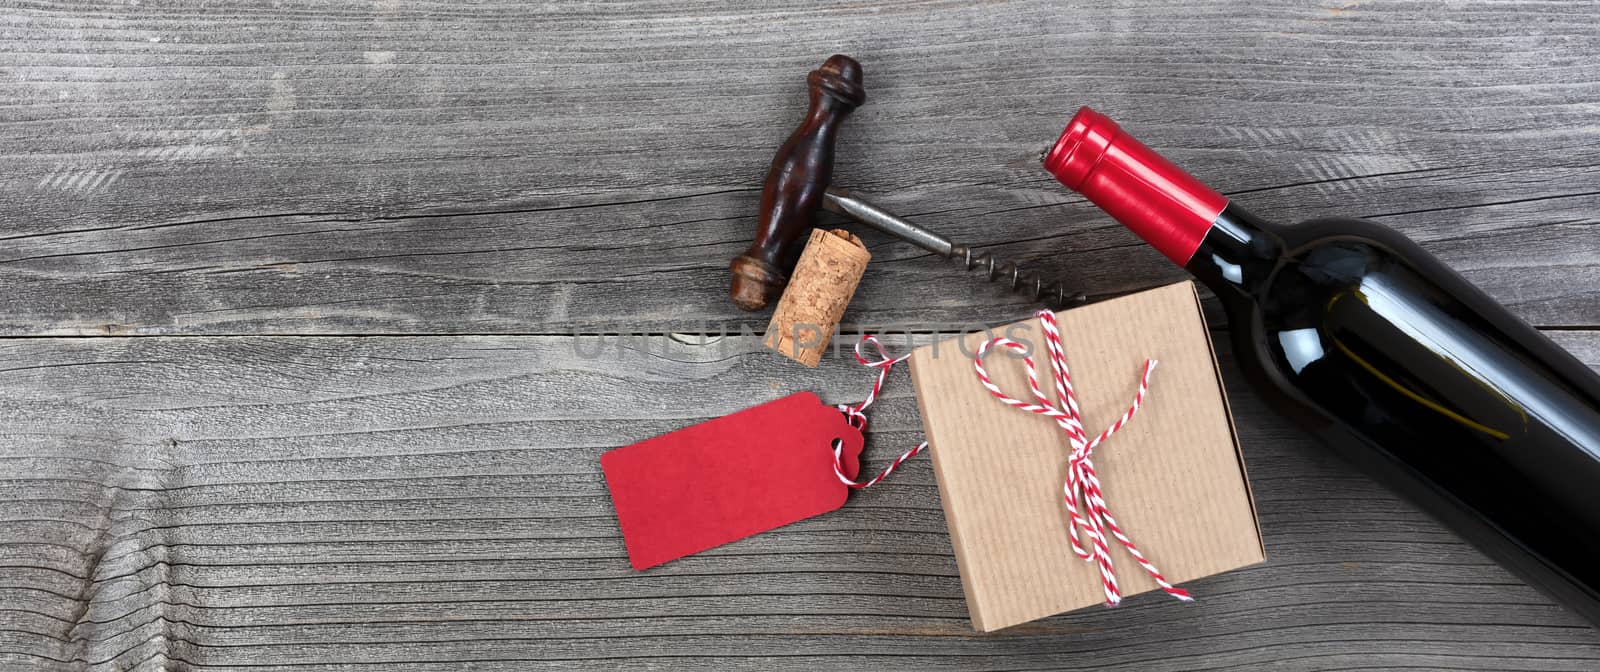 Fathers day gift box with red wine bottle and corkscrew on vintage wooden plank background